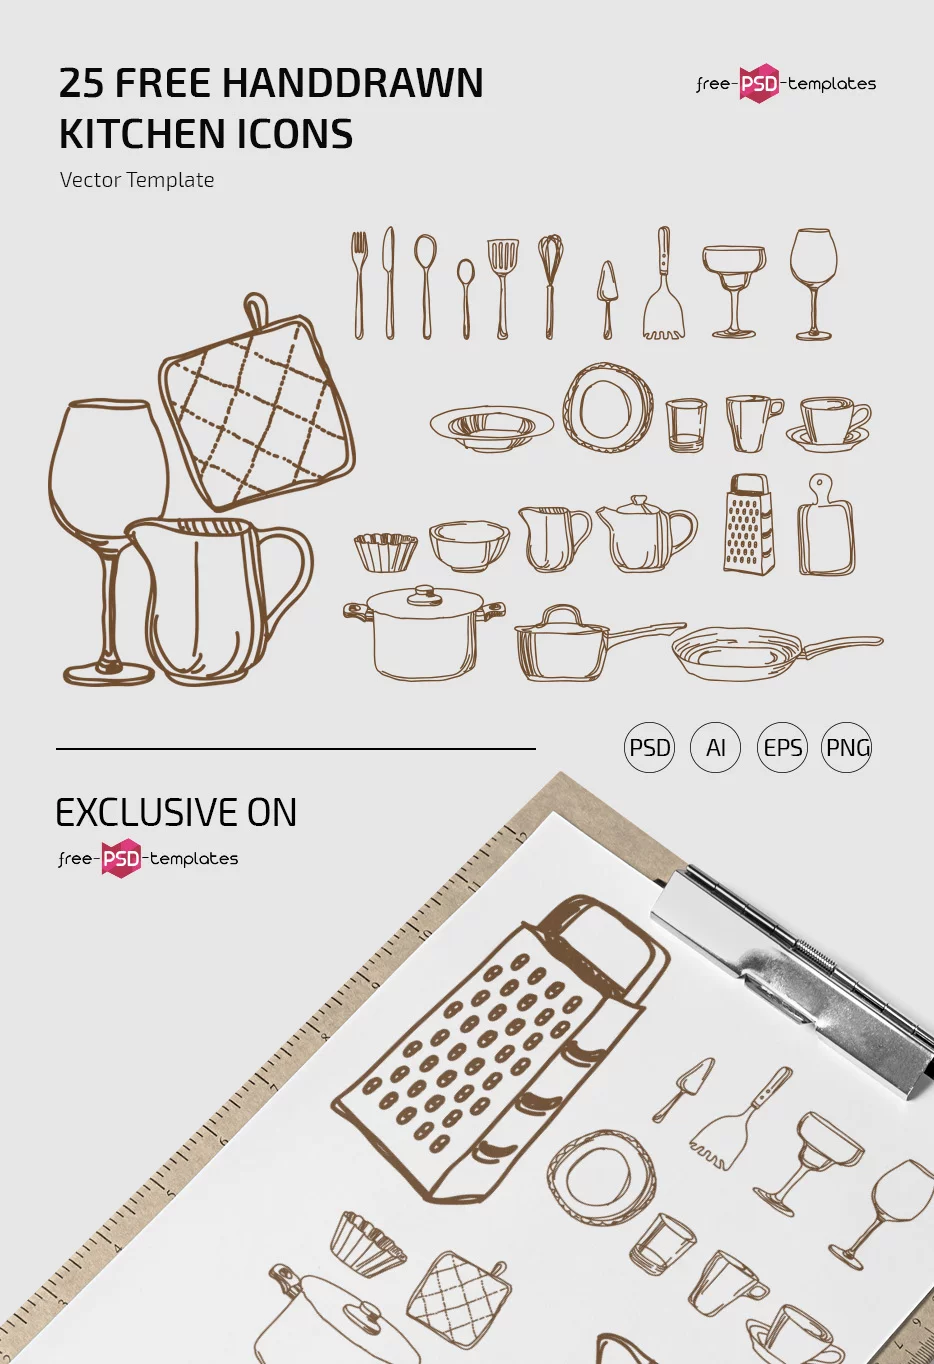 25 free vector handdrawn kitchen icons